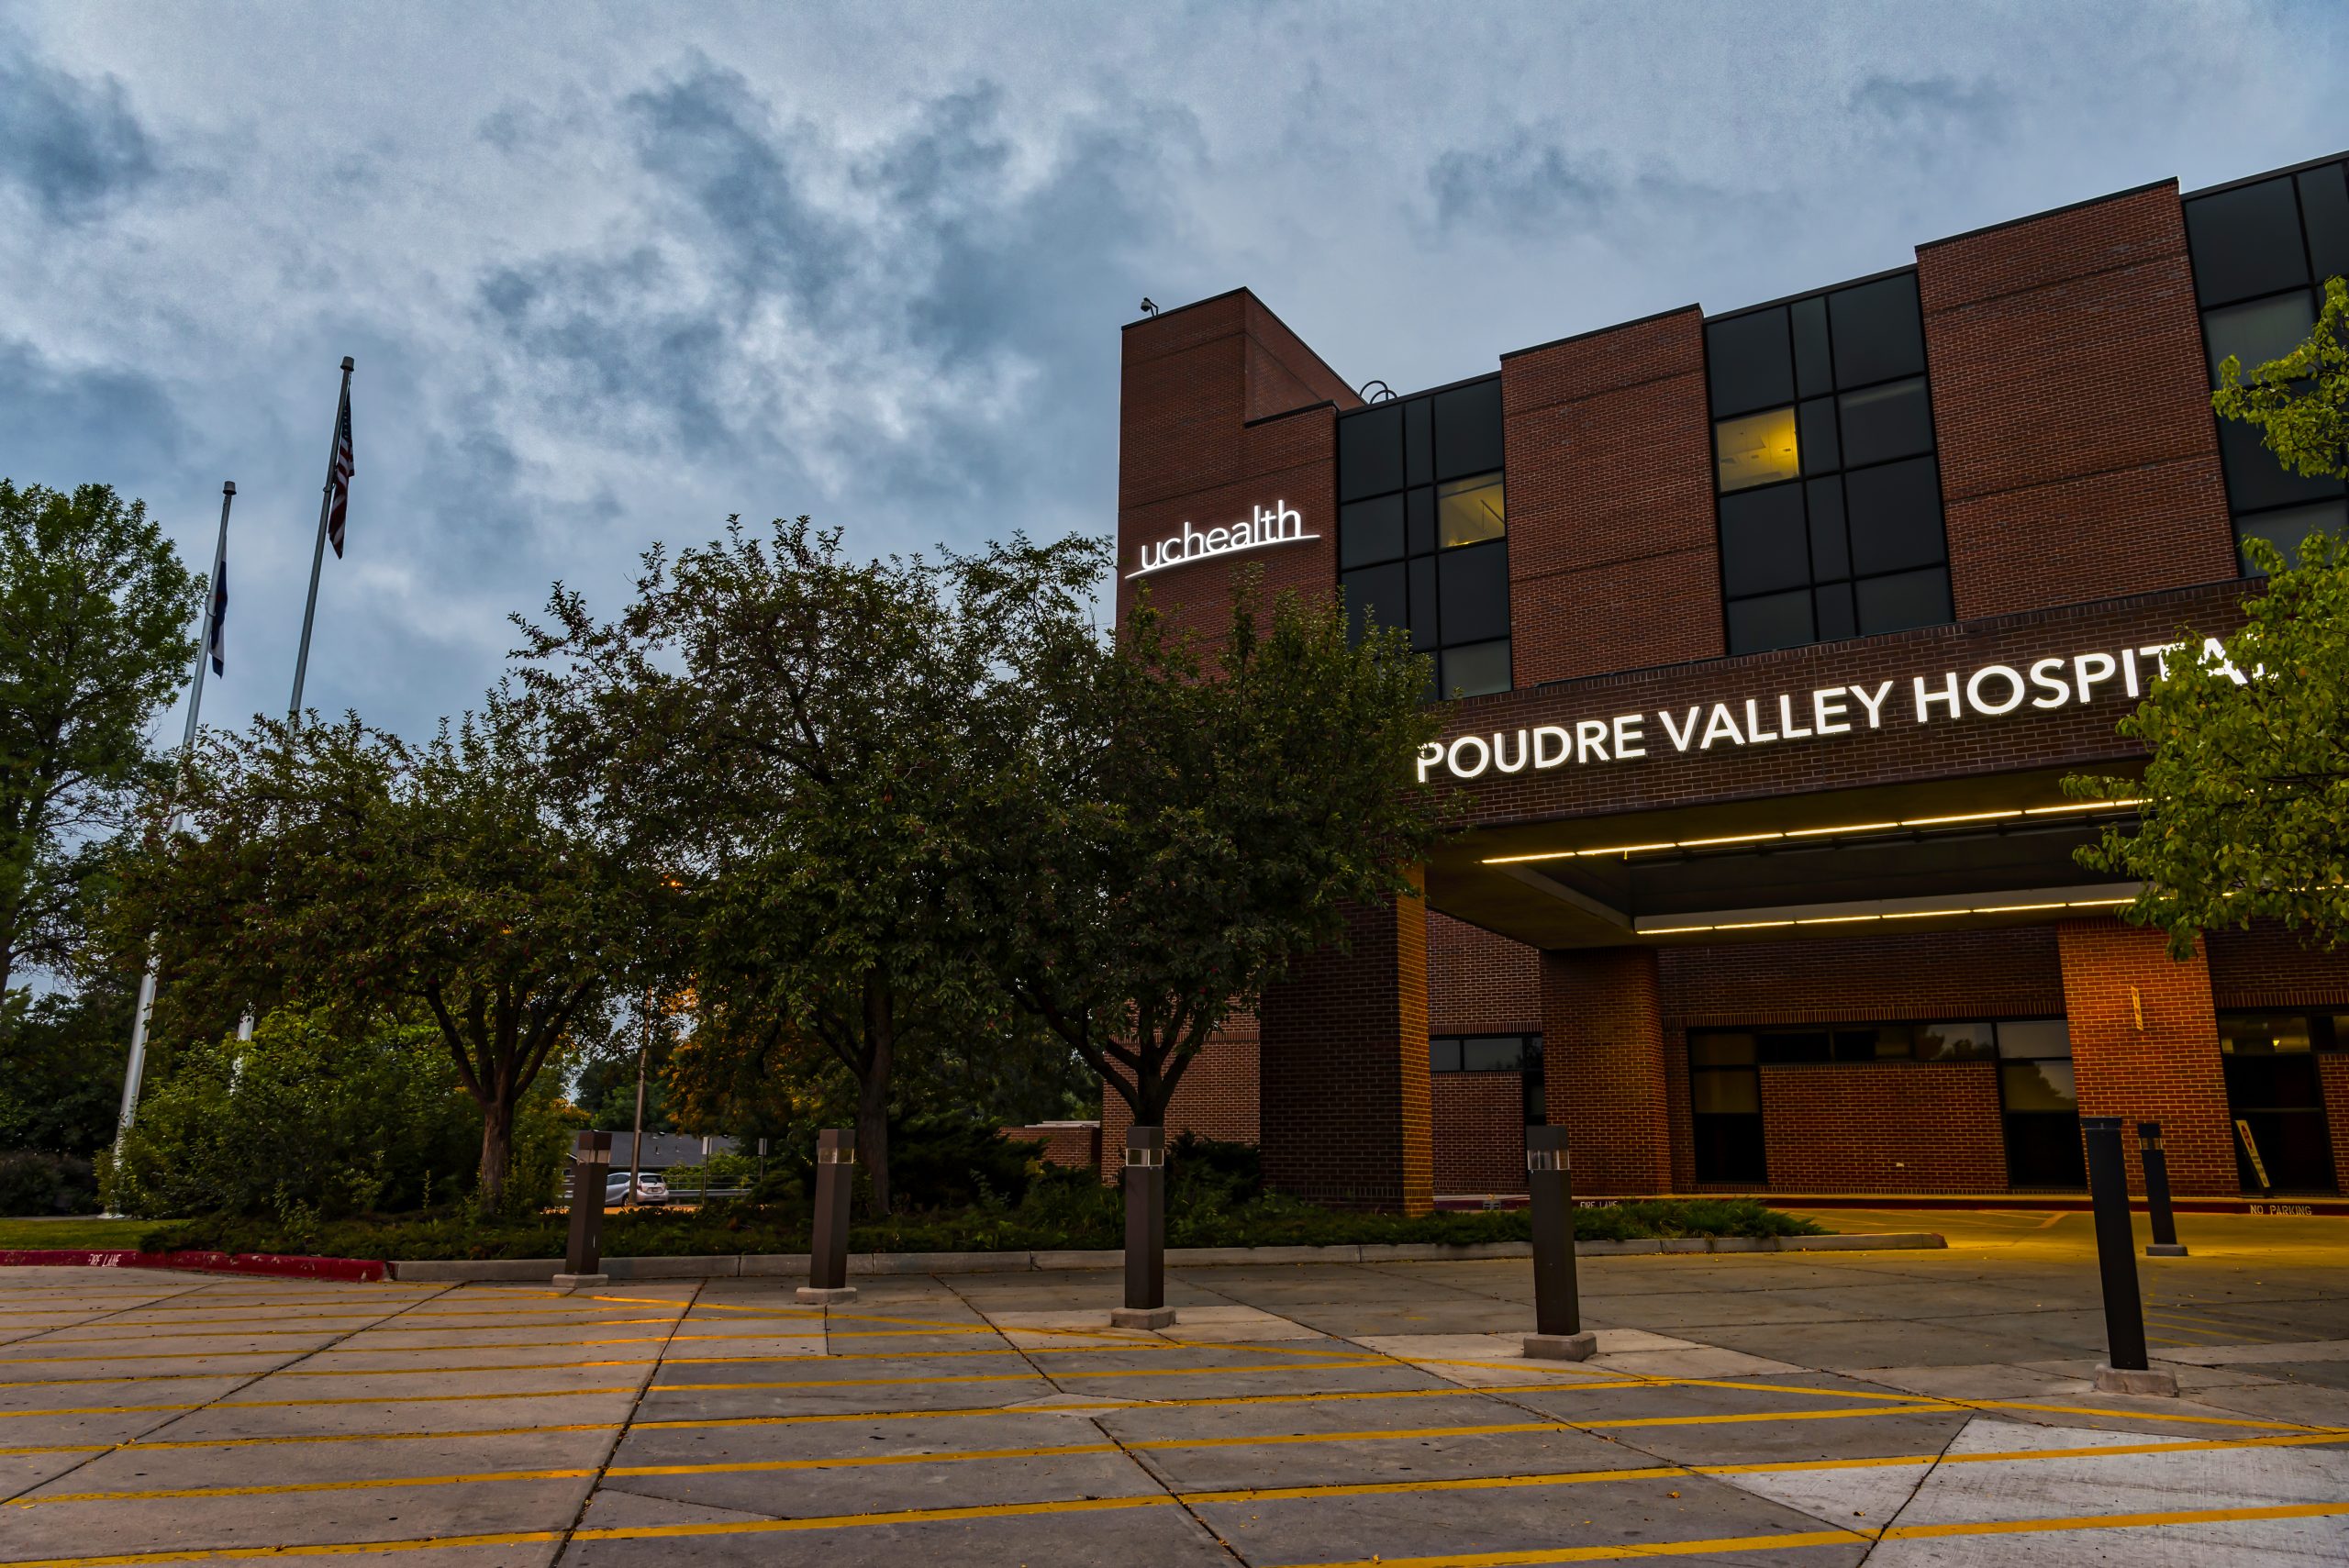 Poudre Valley Hospital exterior